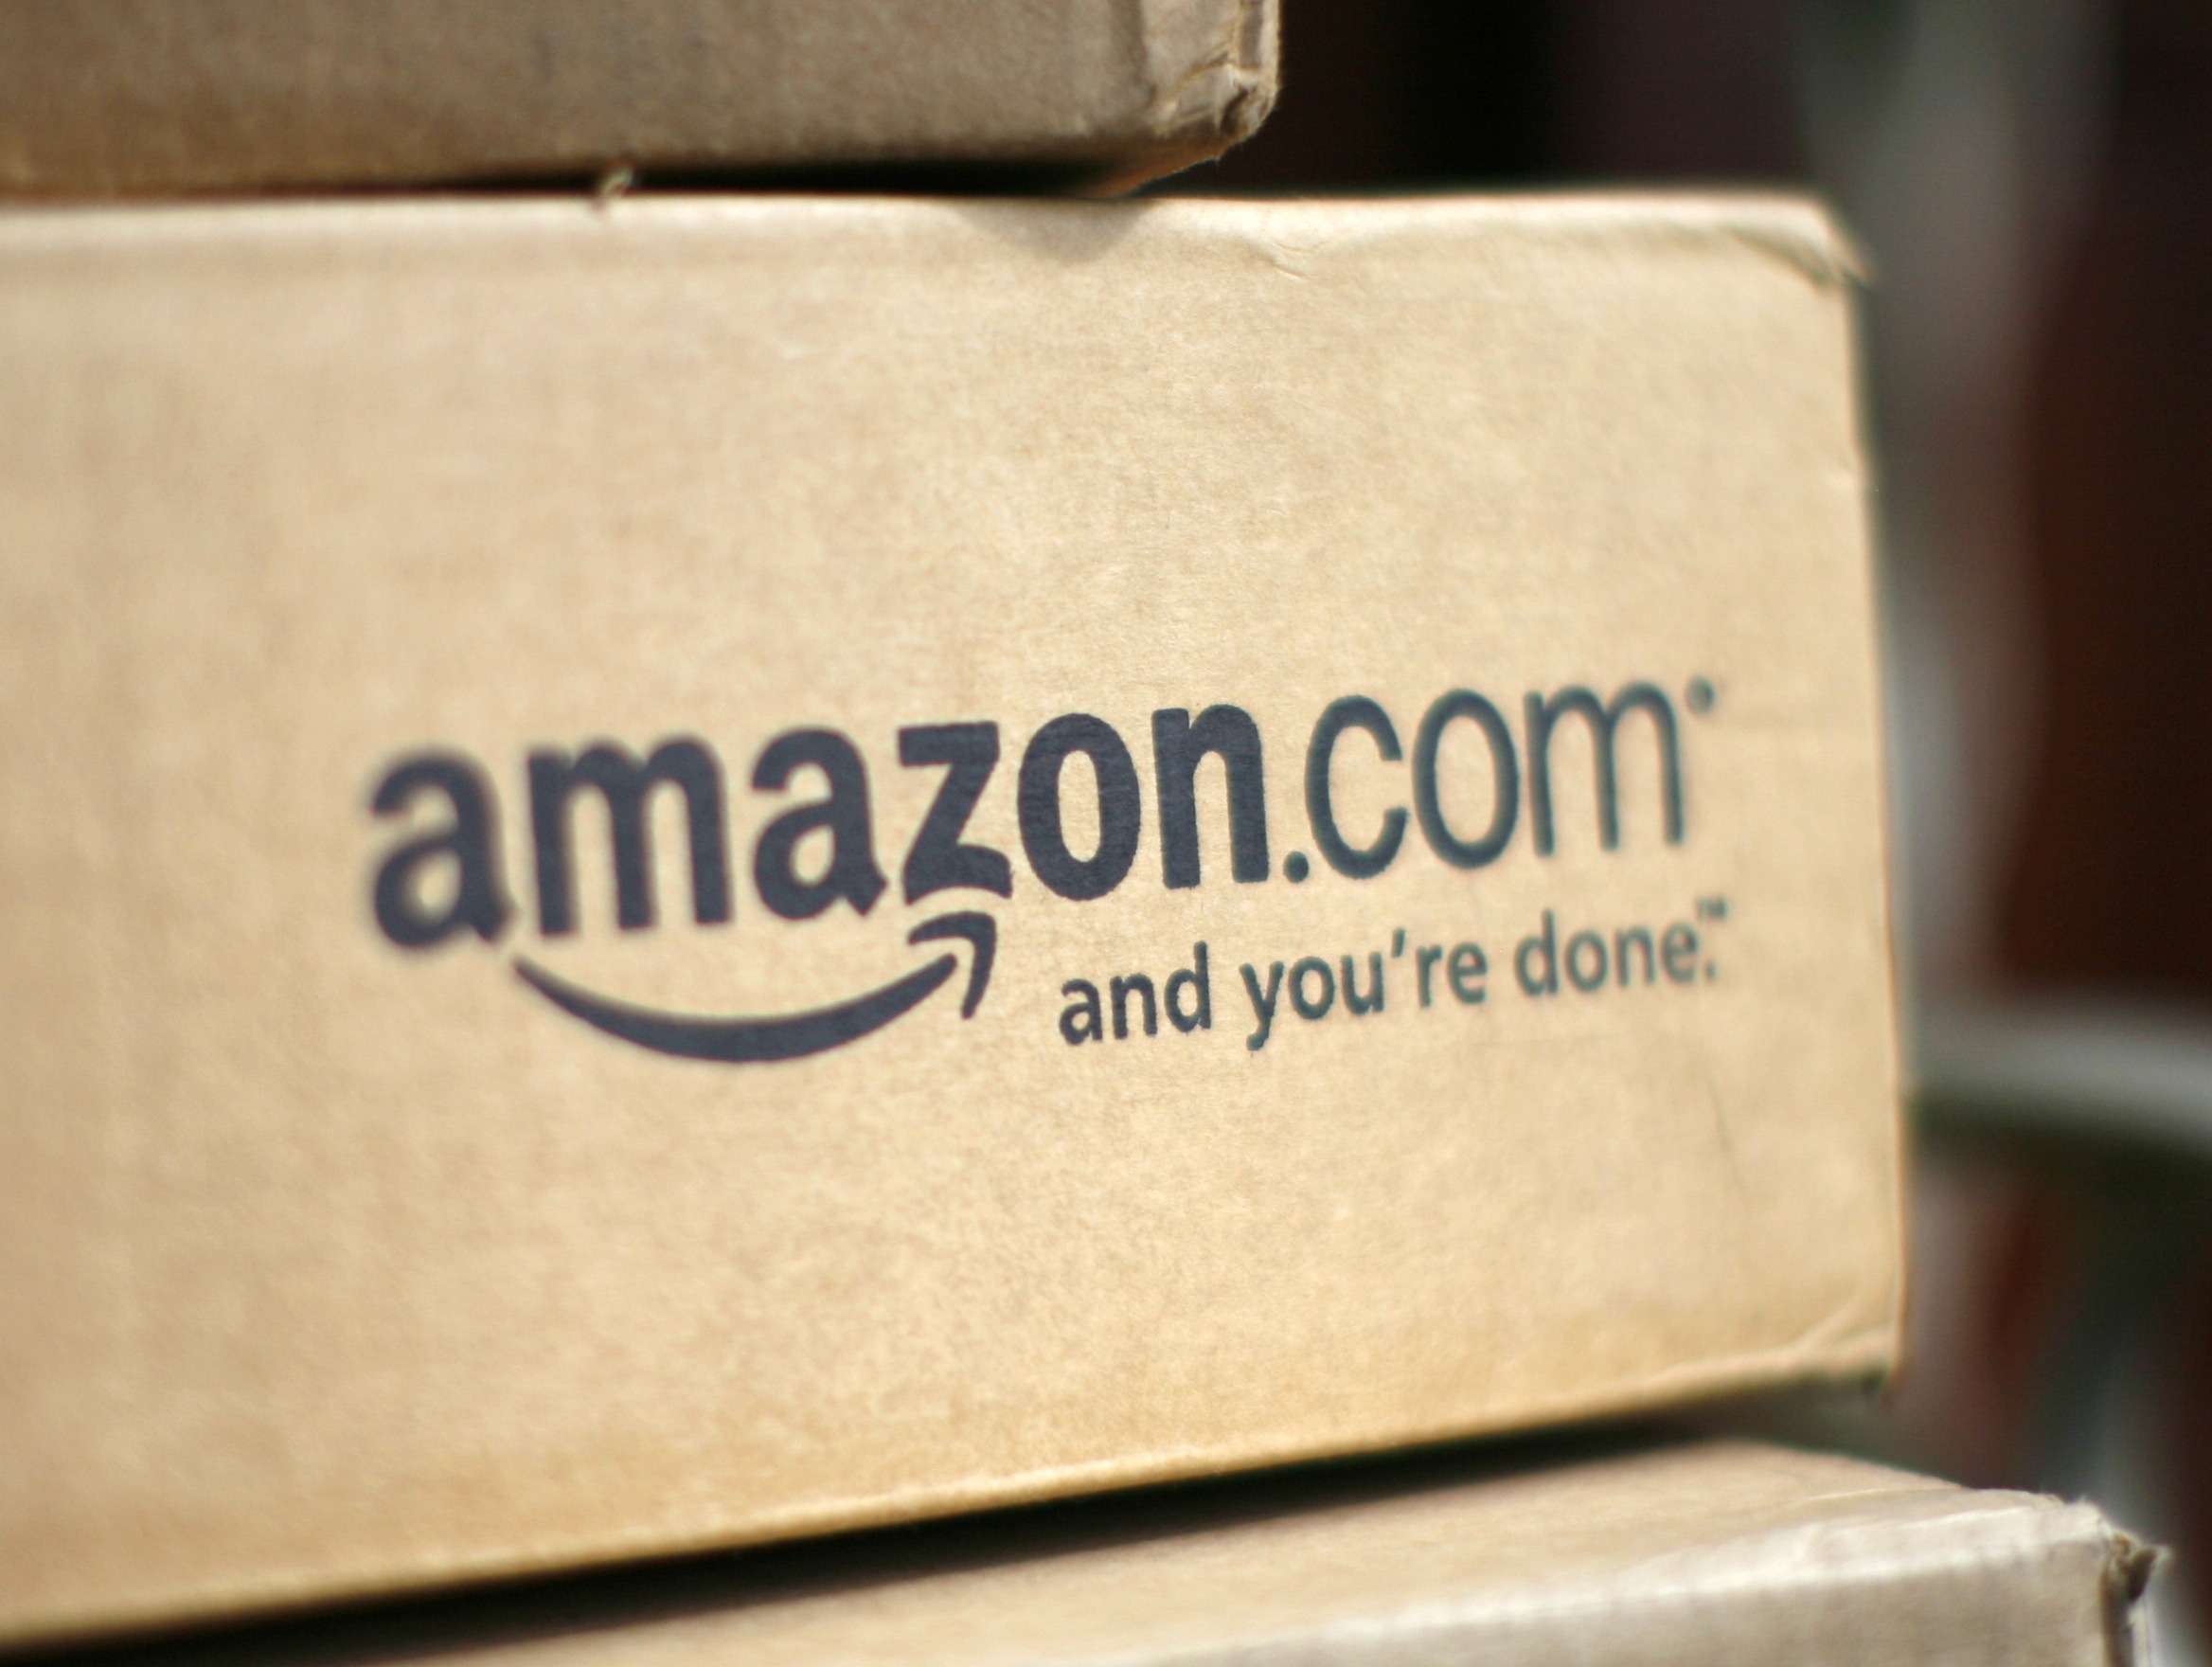 Companies like Amazon have a management culture that is customer-centric at every touchpoint in the consumer journey. Photo: ReutersA box from Amazon.com is pictured on the porch of a house in Golden, Colorado in this July 23, 2008 file photograph. Amazon.com Inc reported its first quarterly net loss in more than five years on Thursday as the world's largest internet retailer spent heavily and suffered from an economic slowdown in Europe. REUTERS/Rick Wilking/Files (UNITED STATES - Tags: BUSINESS)In this April 29, 2015 photo, a woman uses her smartphone near a booth for the Chinese Internet company Tencent at the Global Mobile Internet Conference in Beijing. Chinese state media reported Thursday, Aug. 18, 2016, that new rules hold chief editors of news websites personally liable for content, months after several portals posted material that was seen as embarrassing to President Xi Jinping. Tencent, one of China's most popular websites, fired its top editor after a July headline mistake